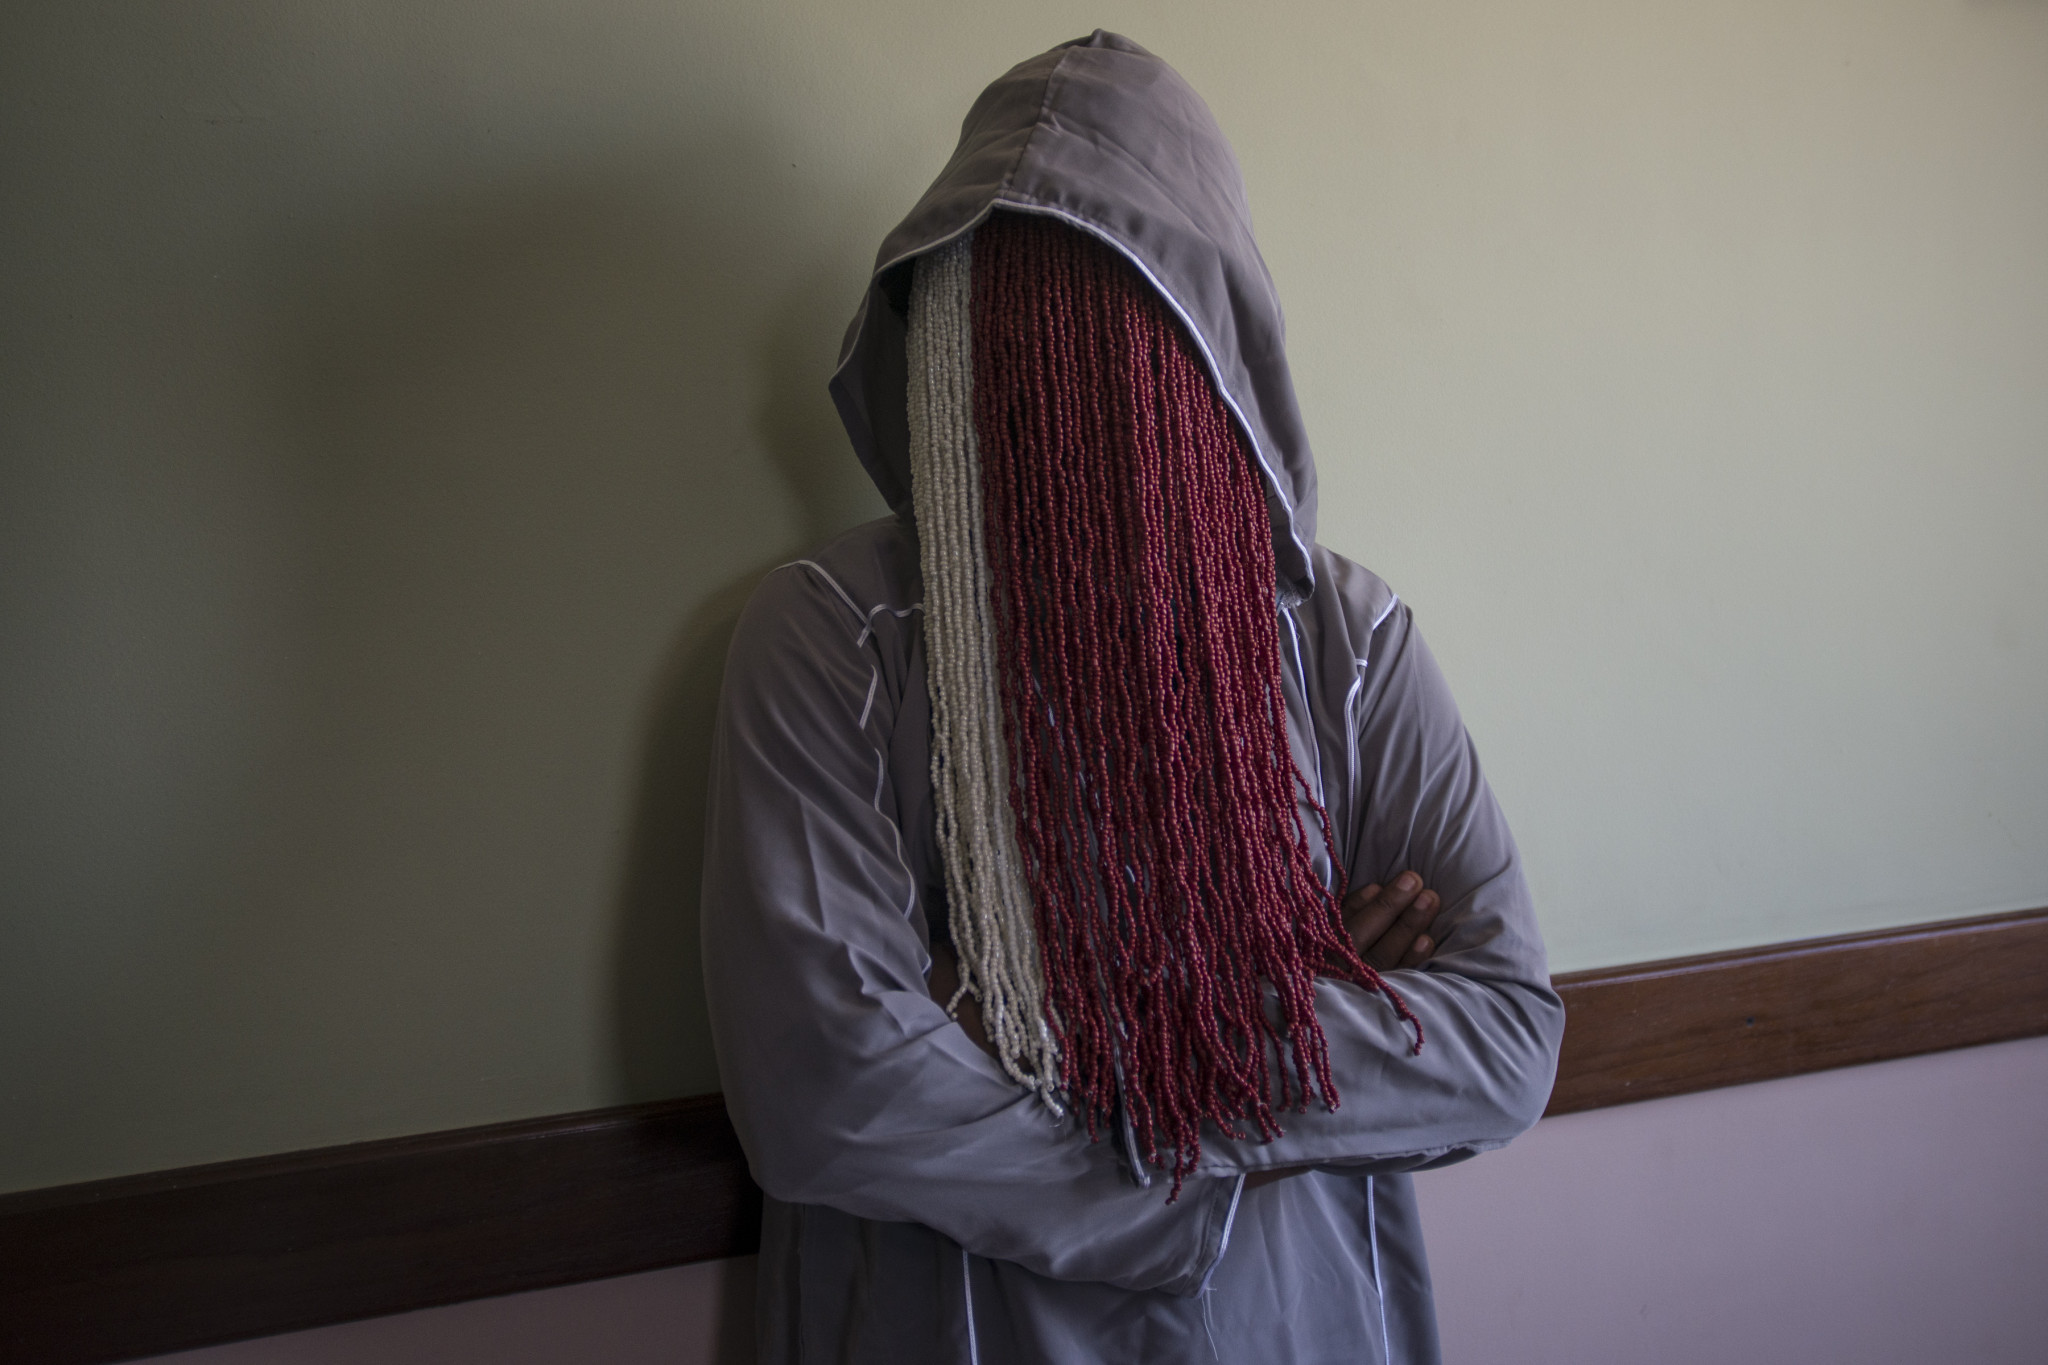 Anas Aremeyaw Anas, who led the investigative team of which Ahmed Hussein-Suale was a part, said the team 